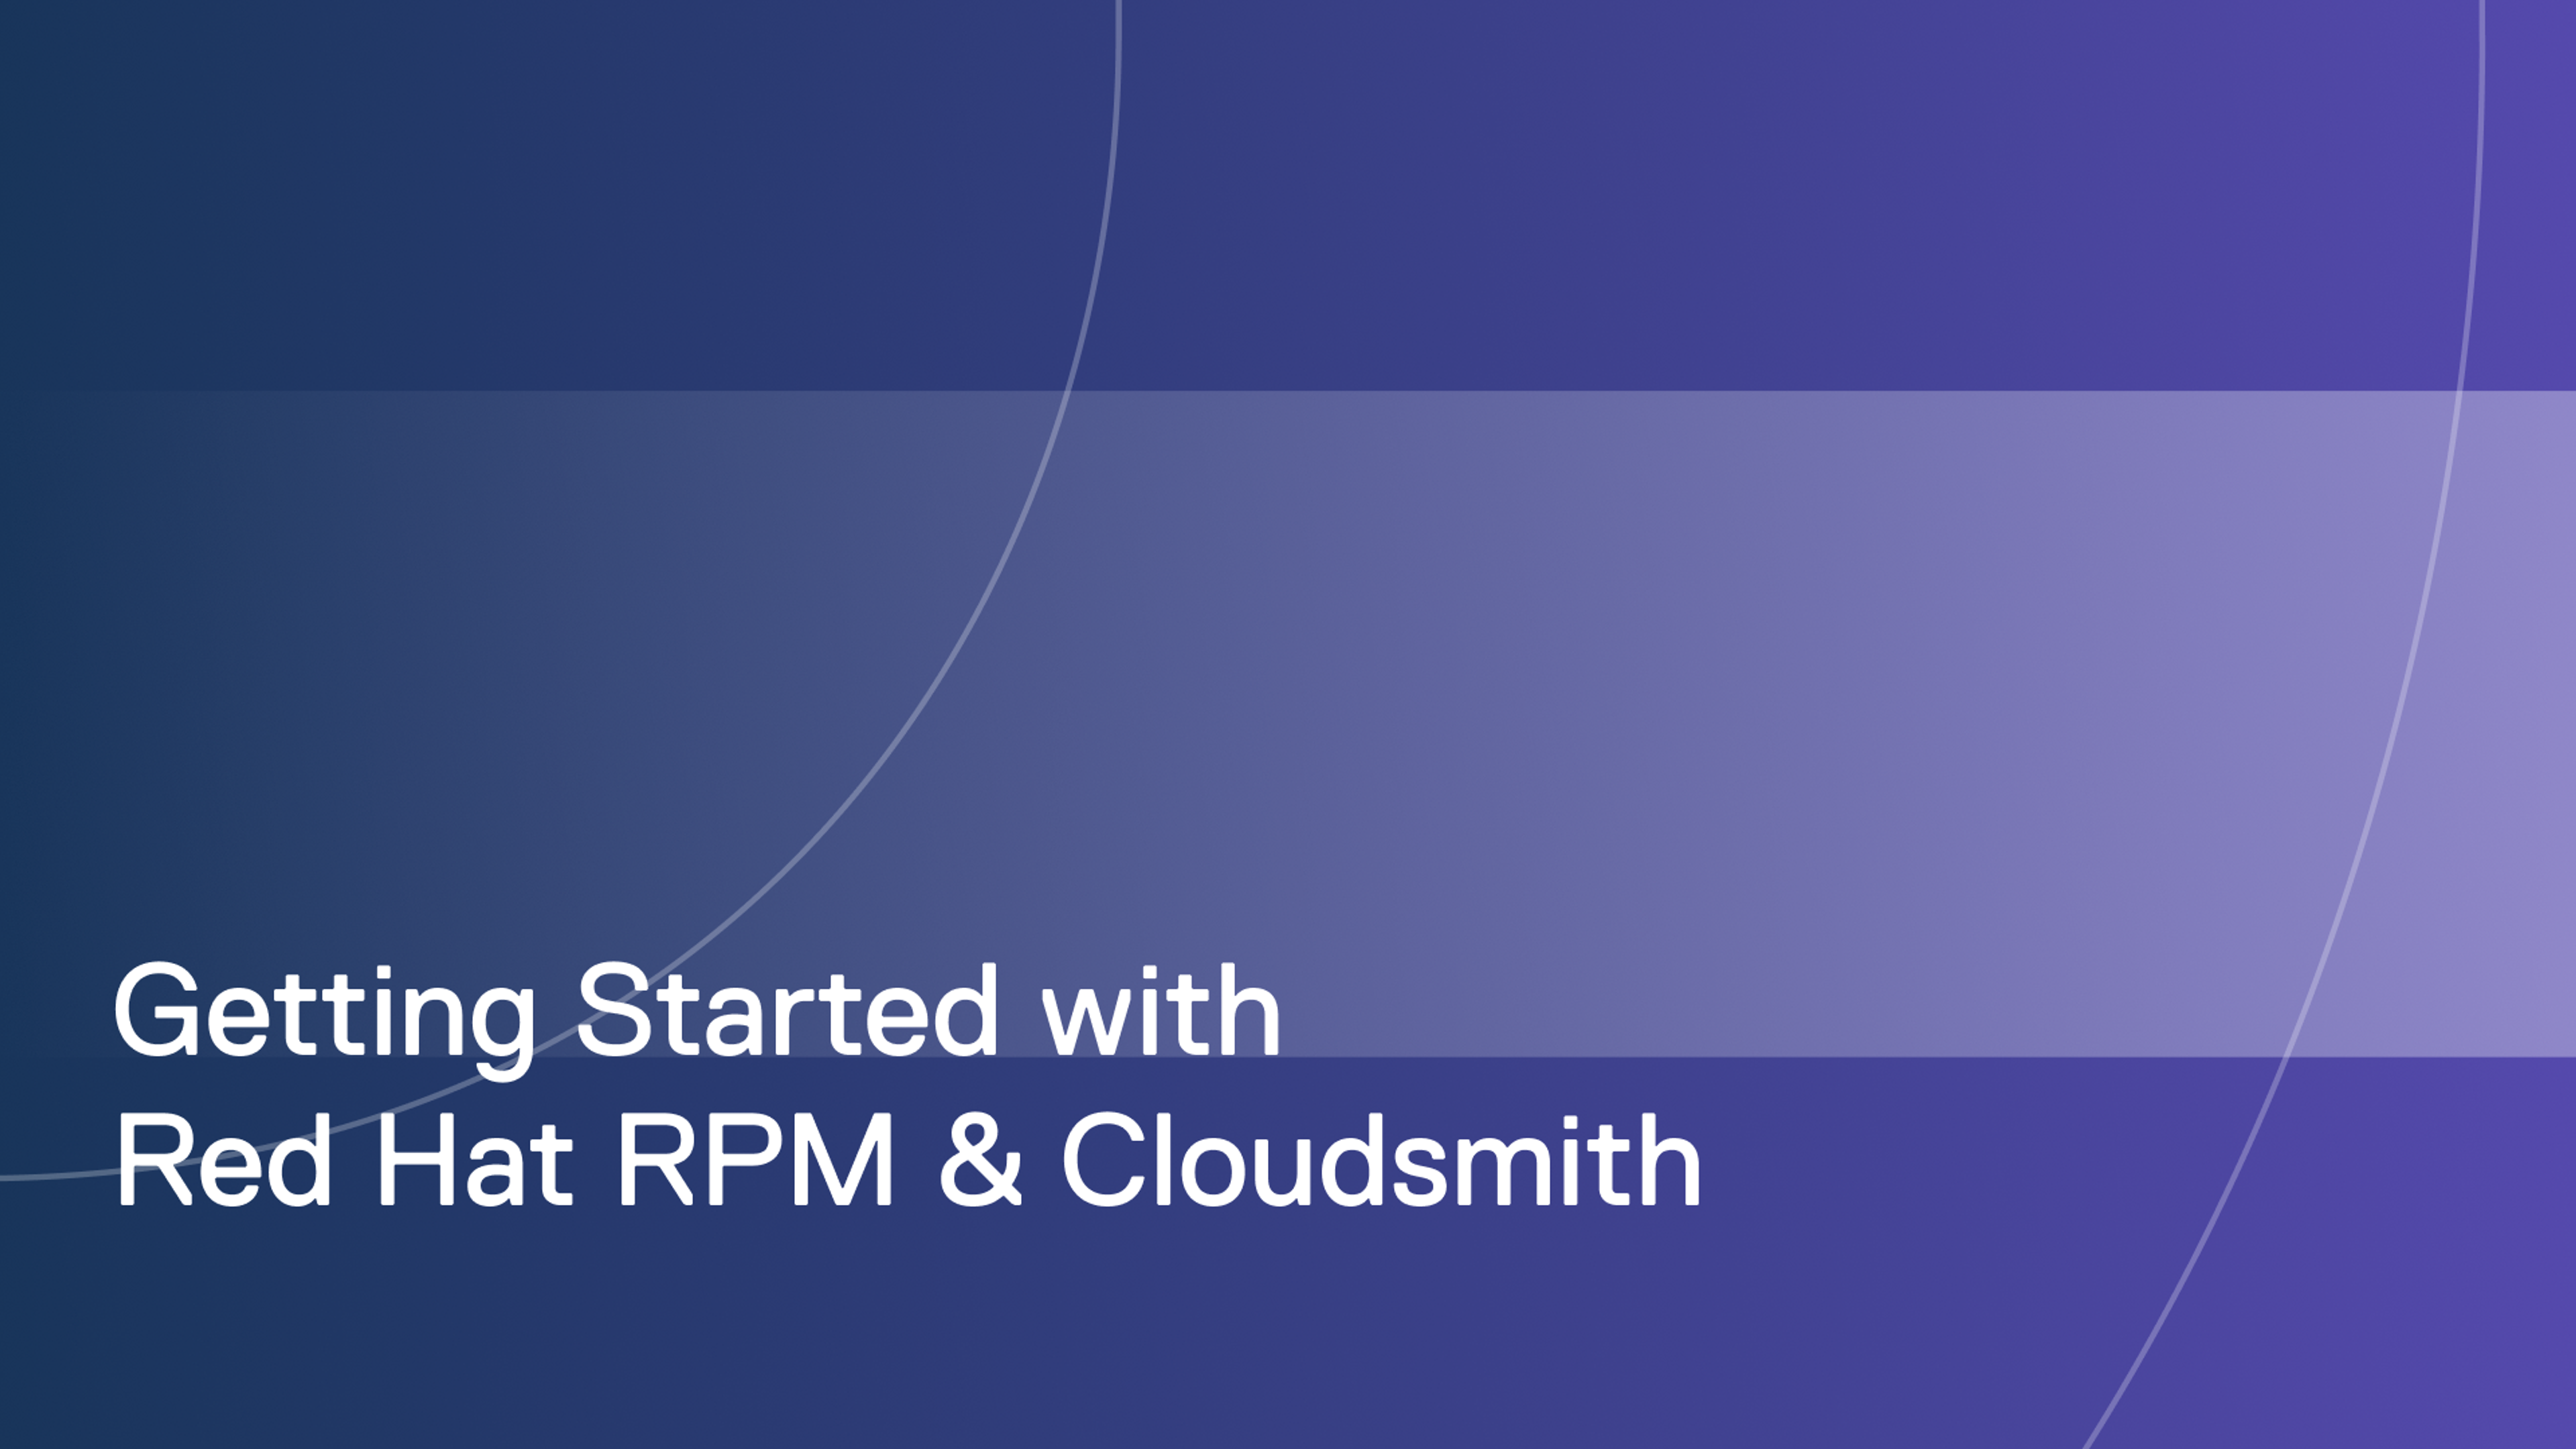 Getting started with Red Hat RPM and Cloudsmith